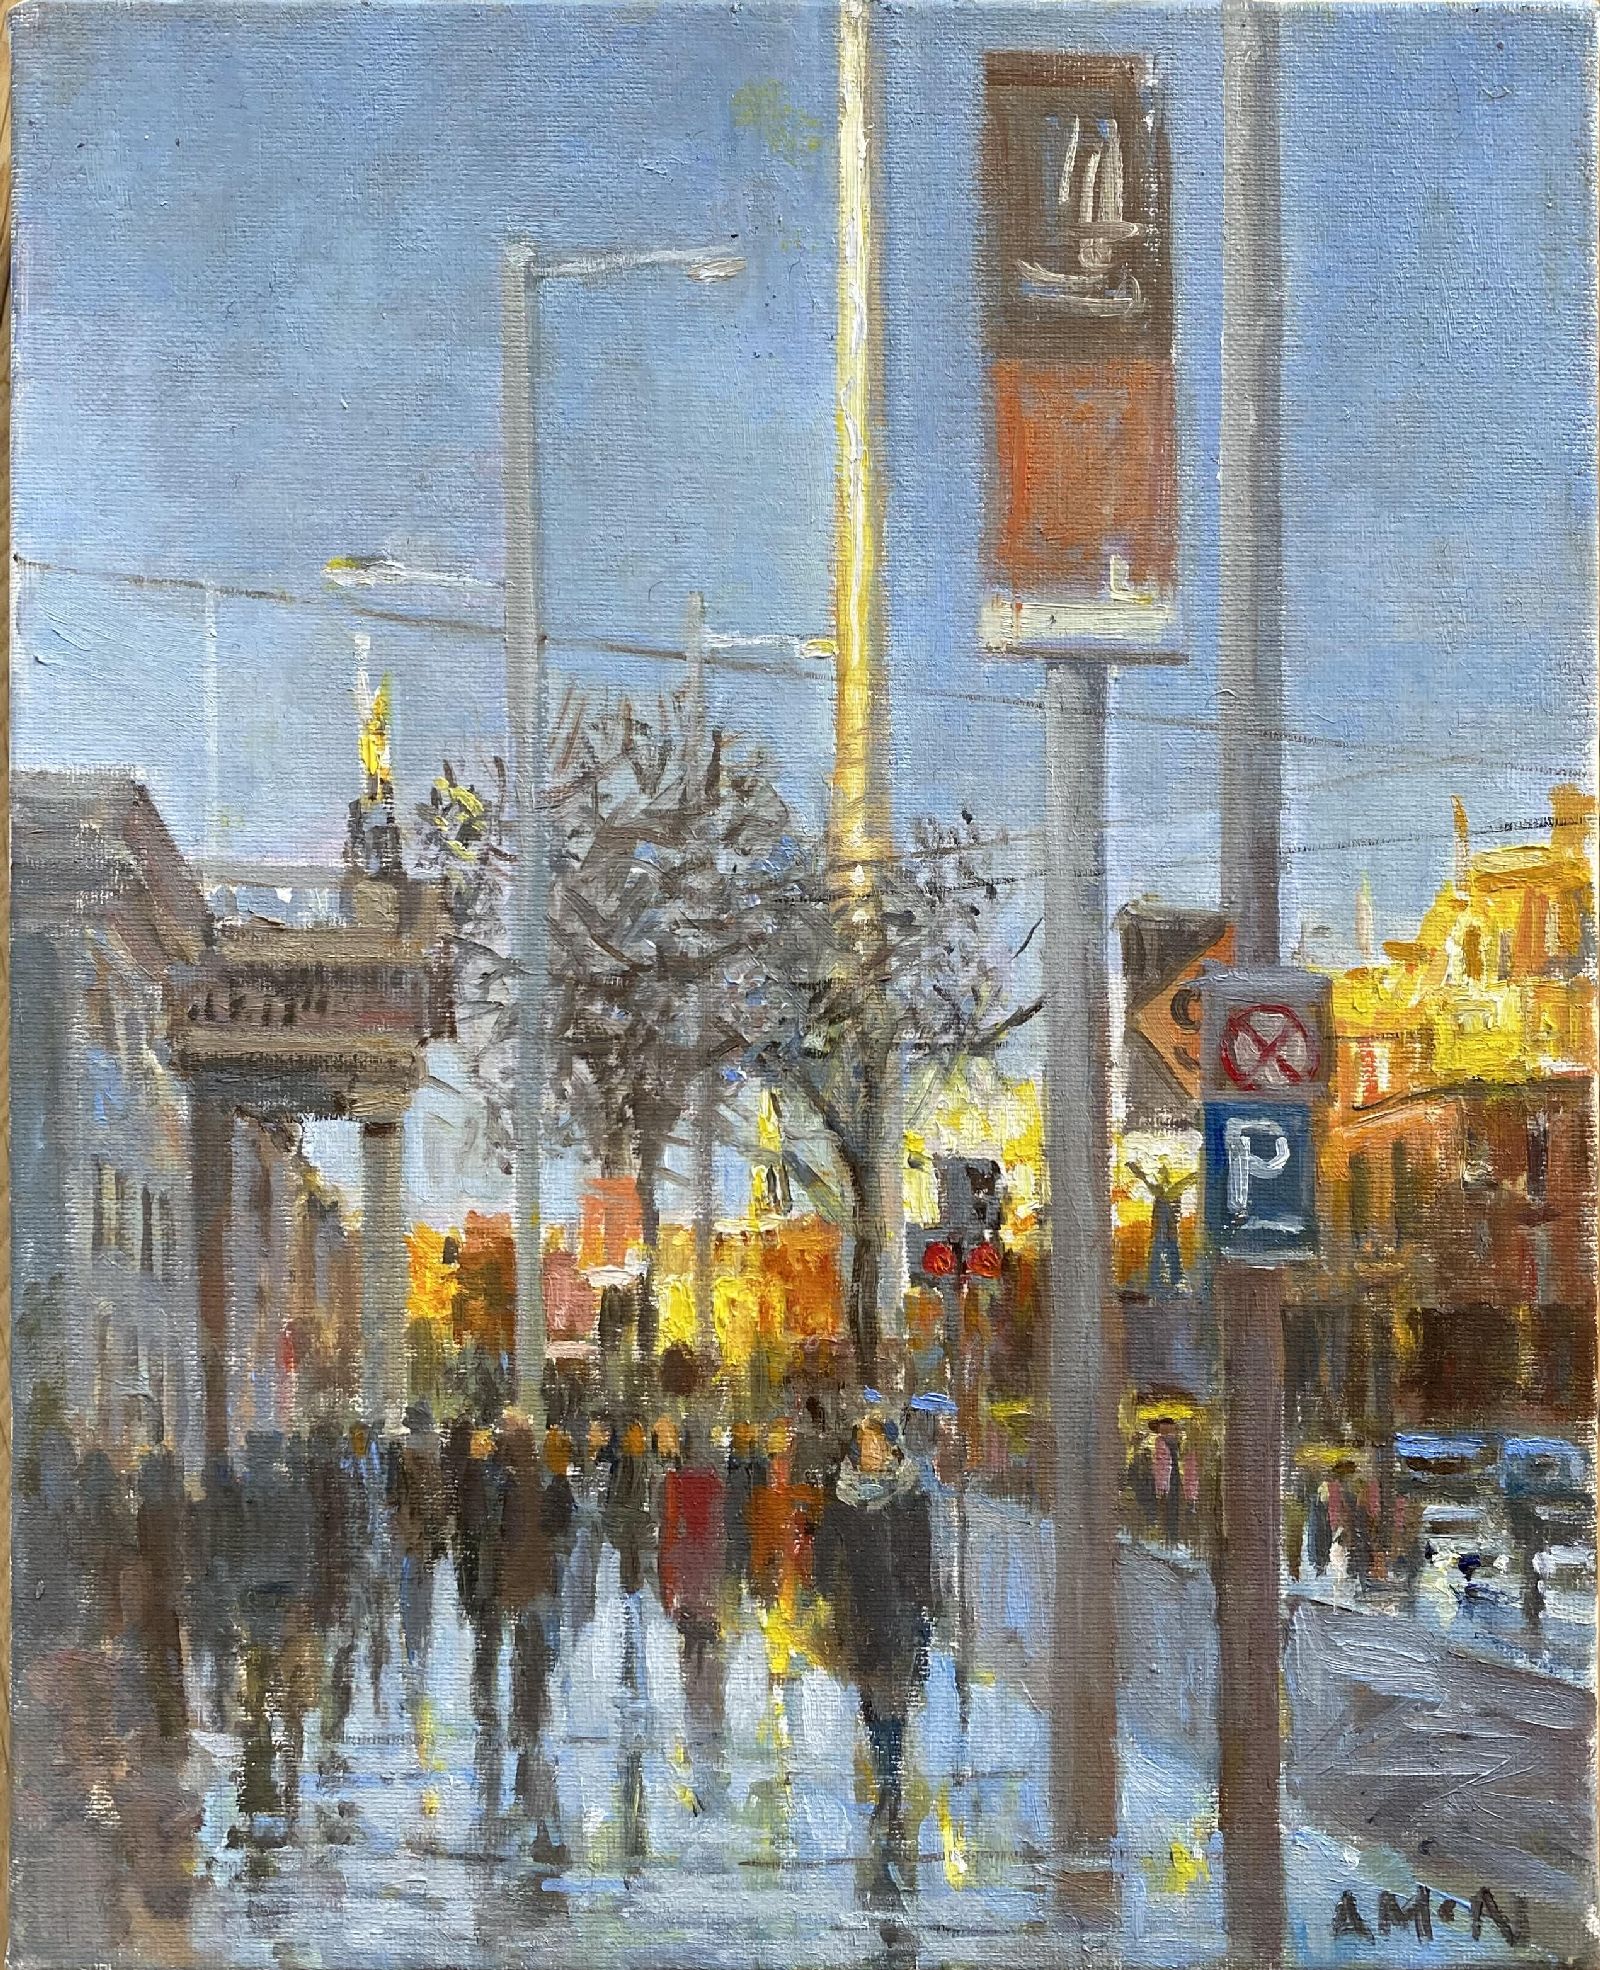 Anne Mc Nulty - O Connell St. Winter sun